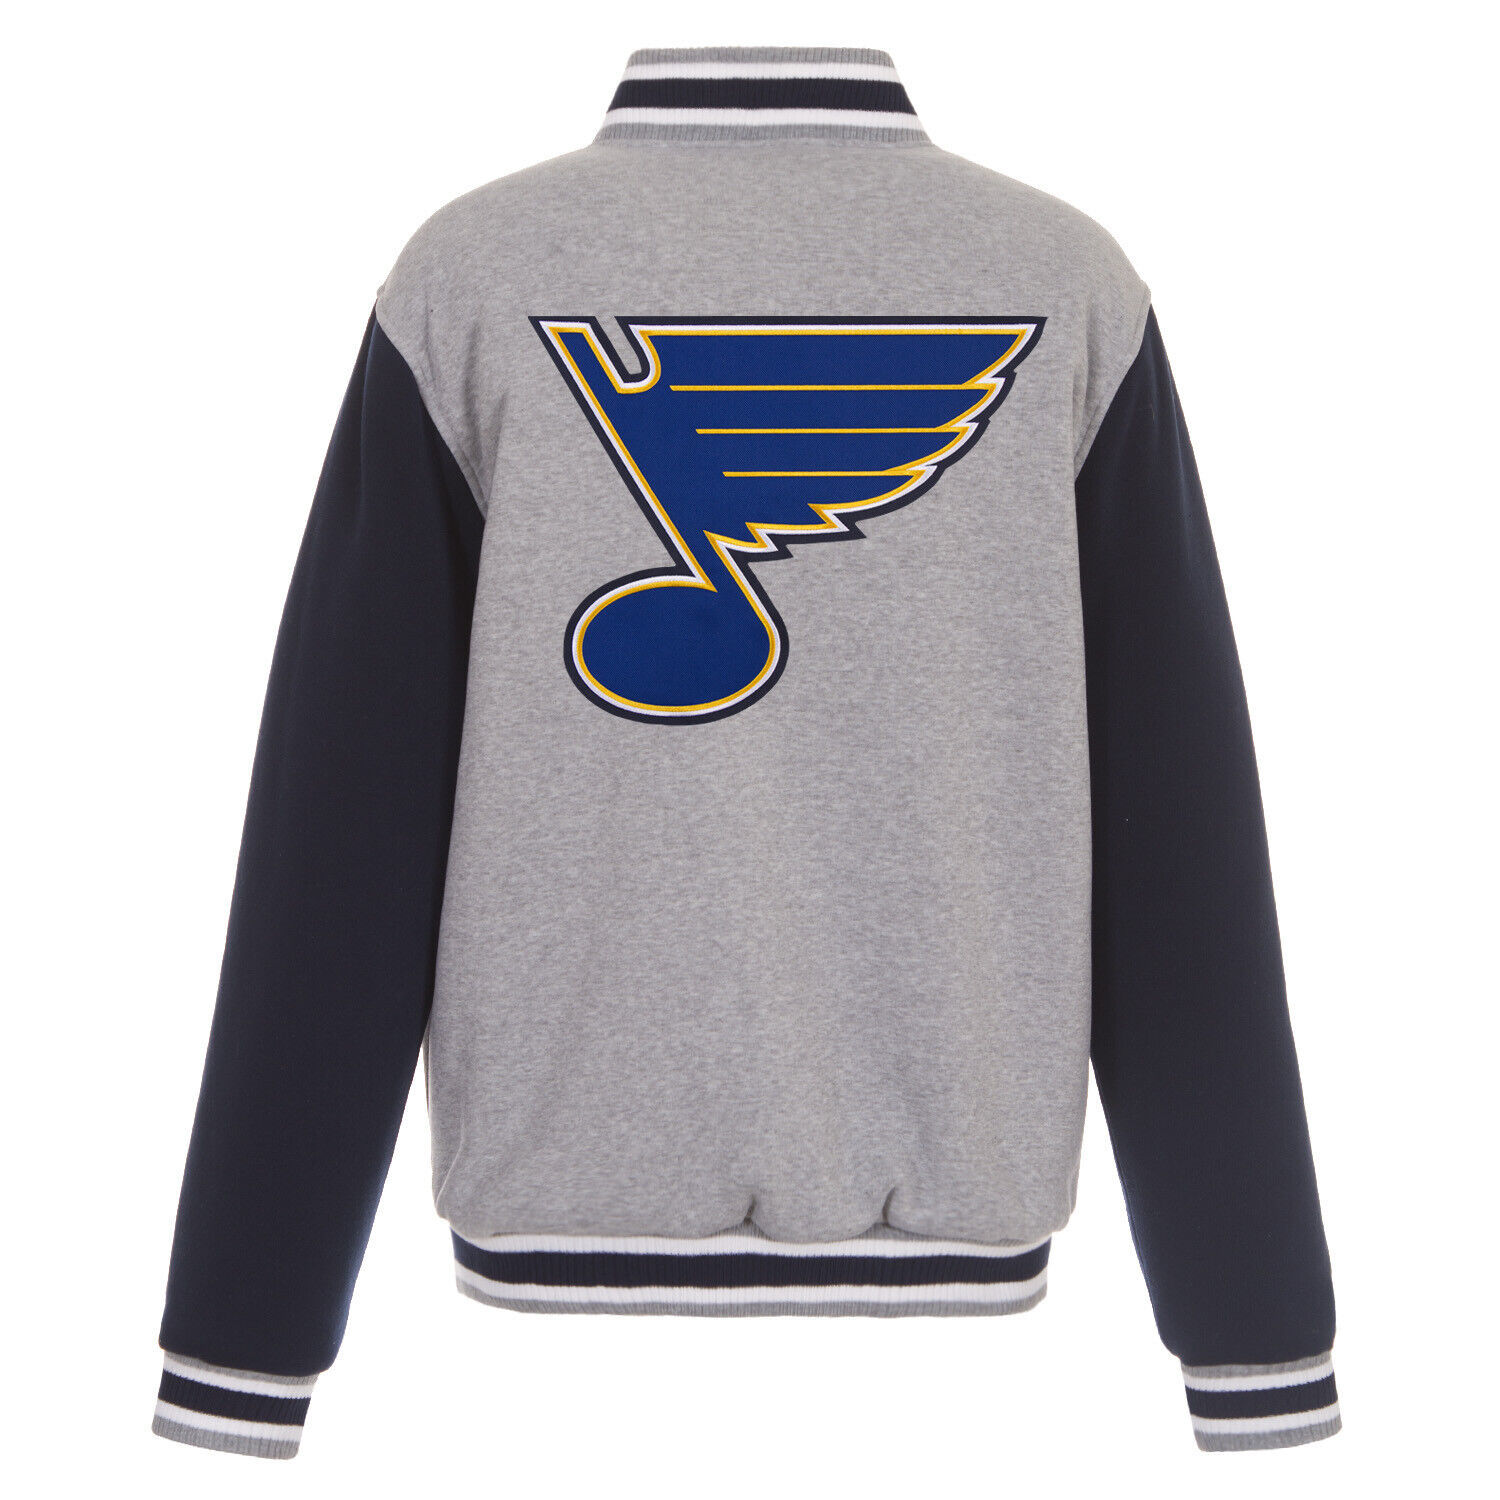 Primary image for NHL St Louis Blues Reversible Full Snap Fleece Jacket Embroidered Logos Black JH